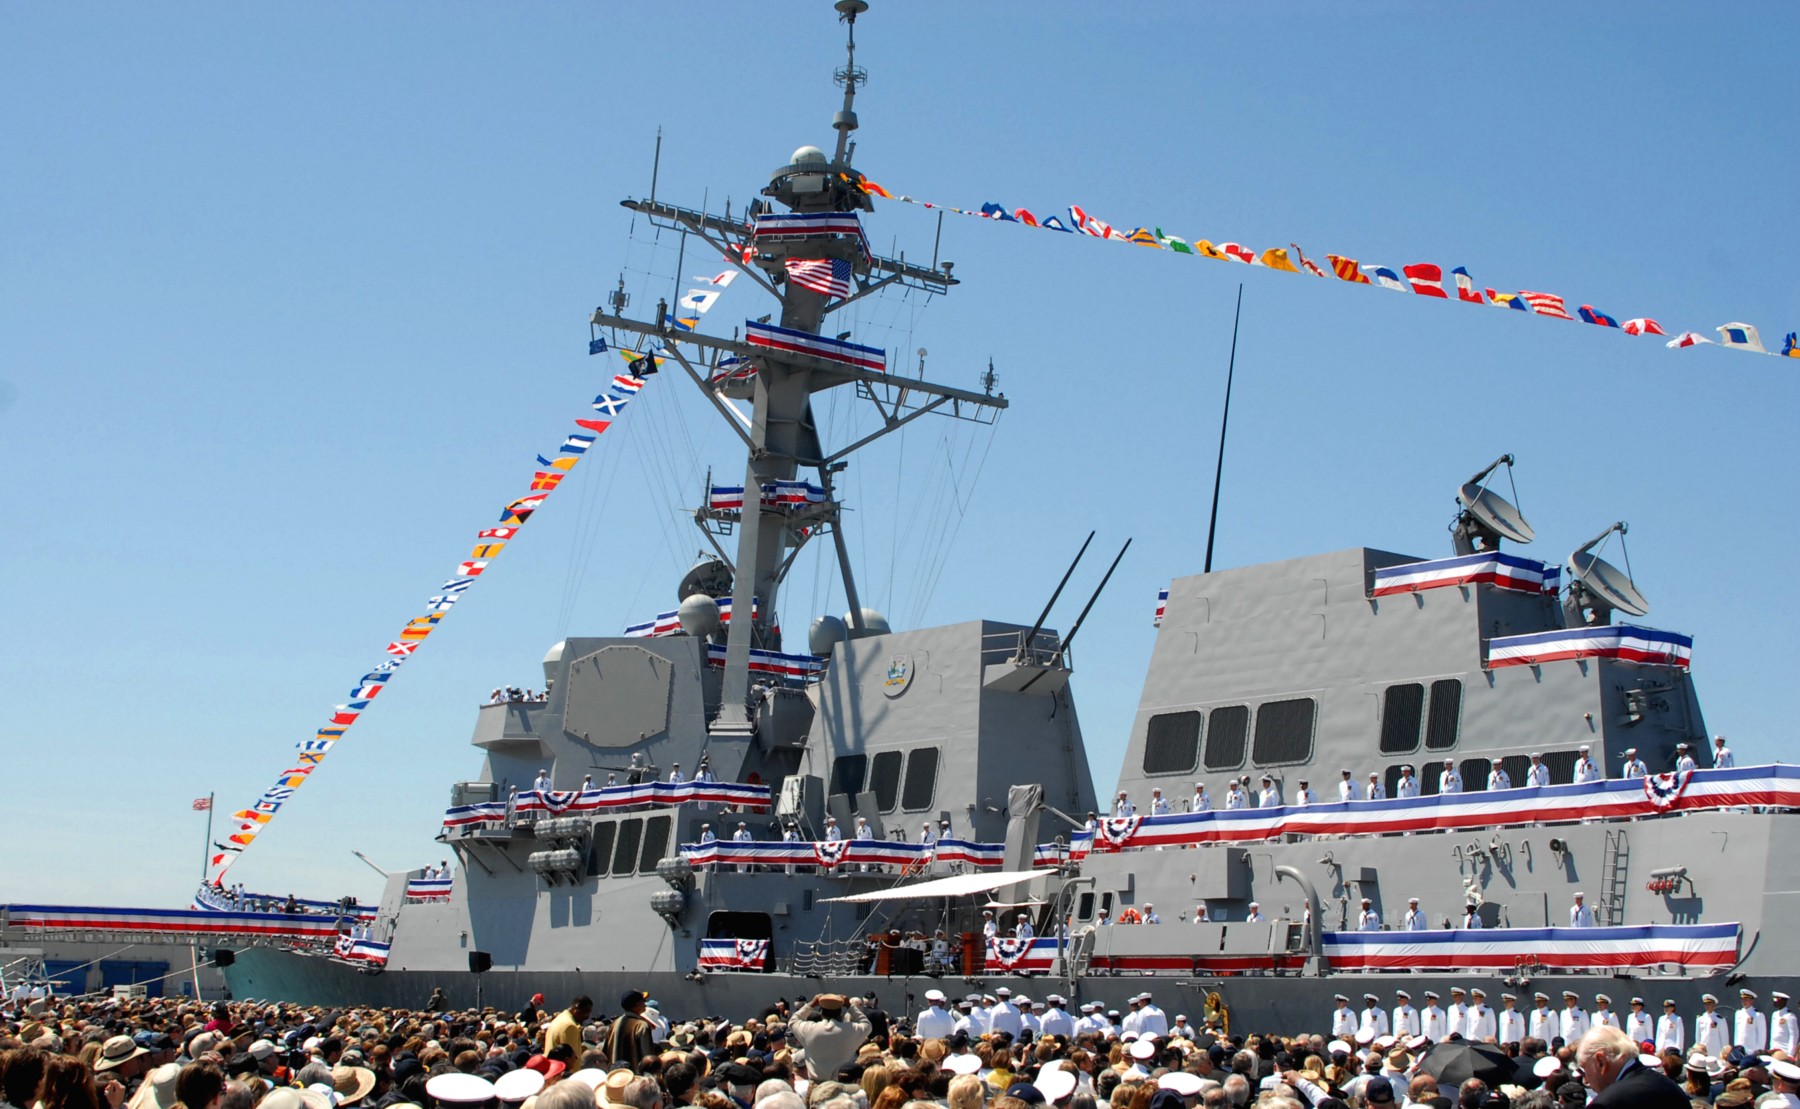 ddg-106 uss stockdale arleigh burke class guided missile destroyer aegis us navy commissioning ceremony ventura county california 66